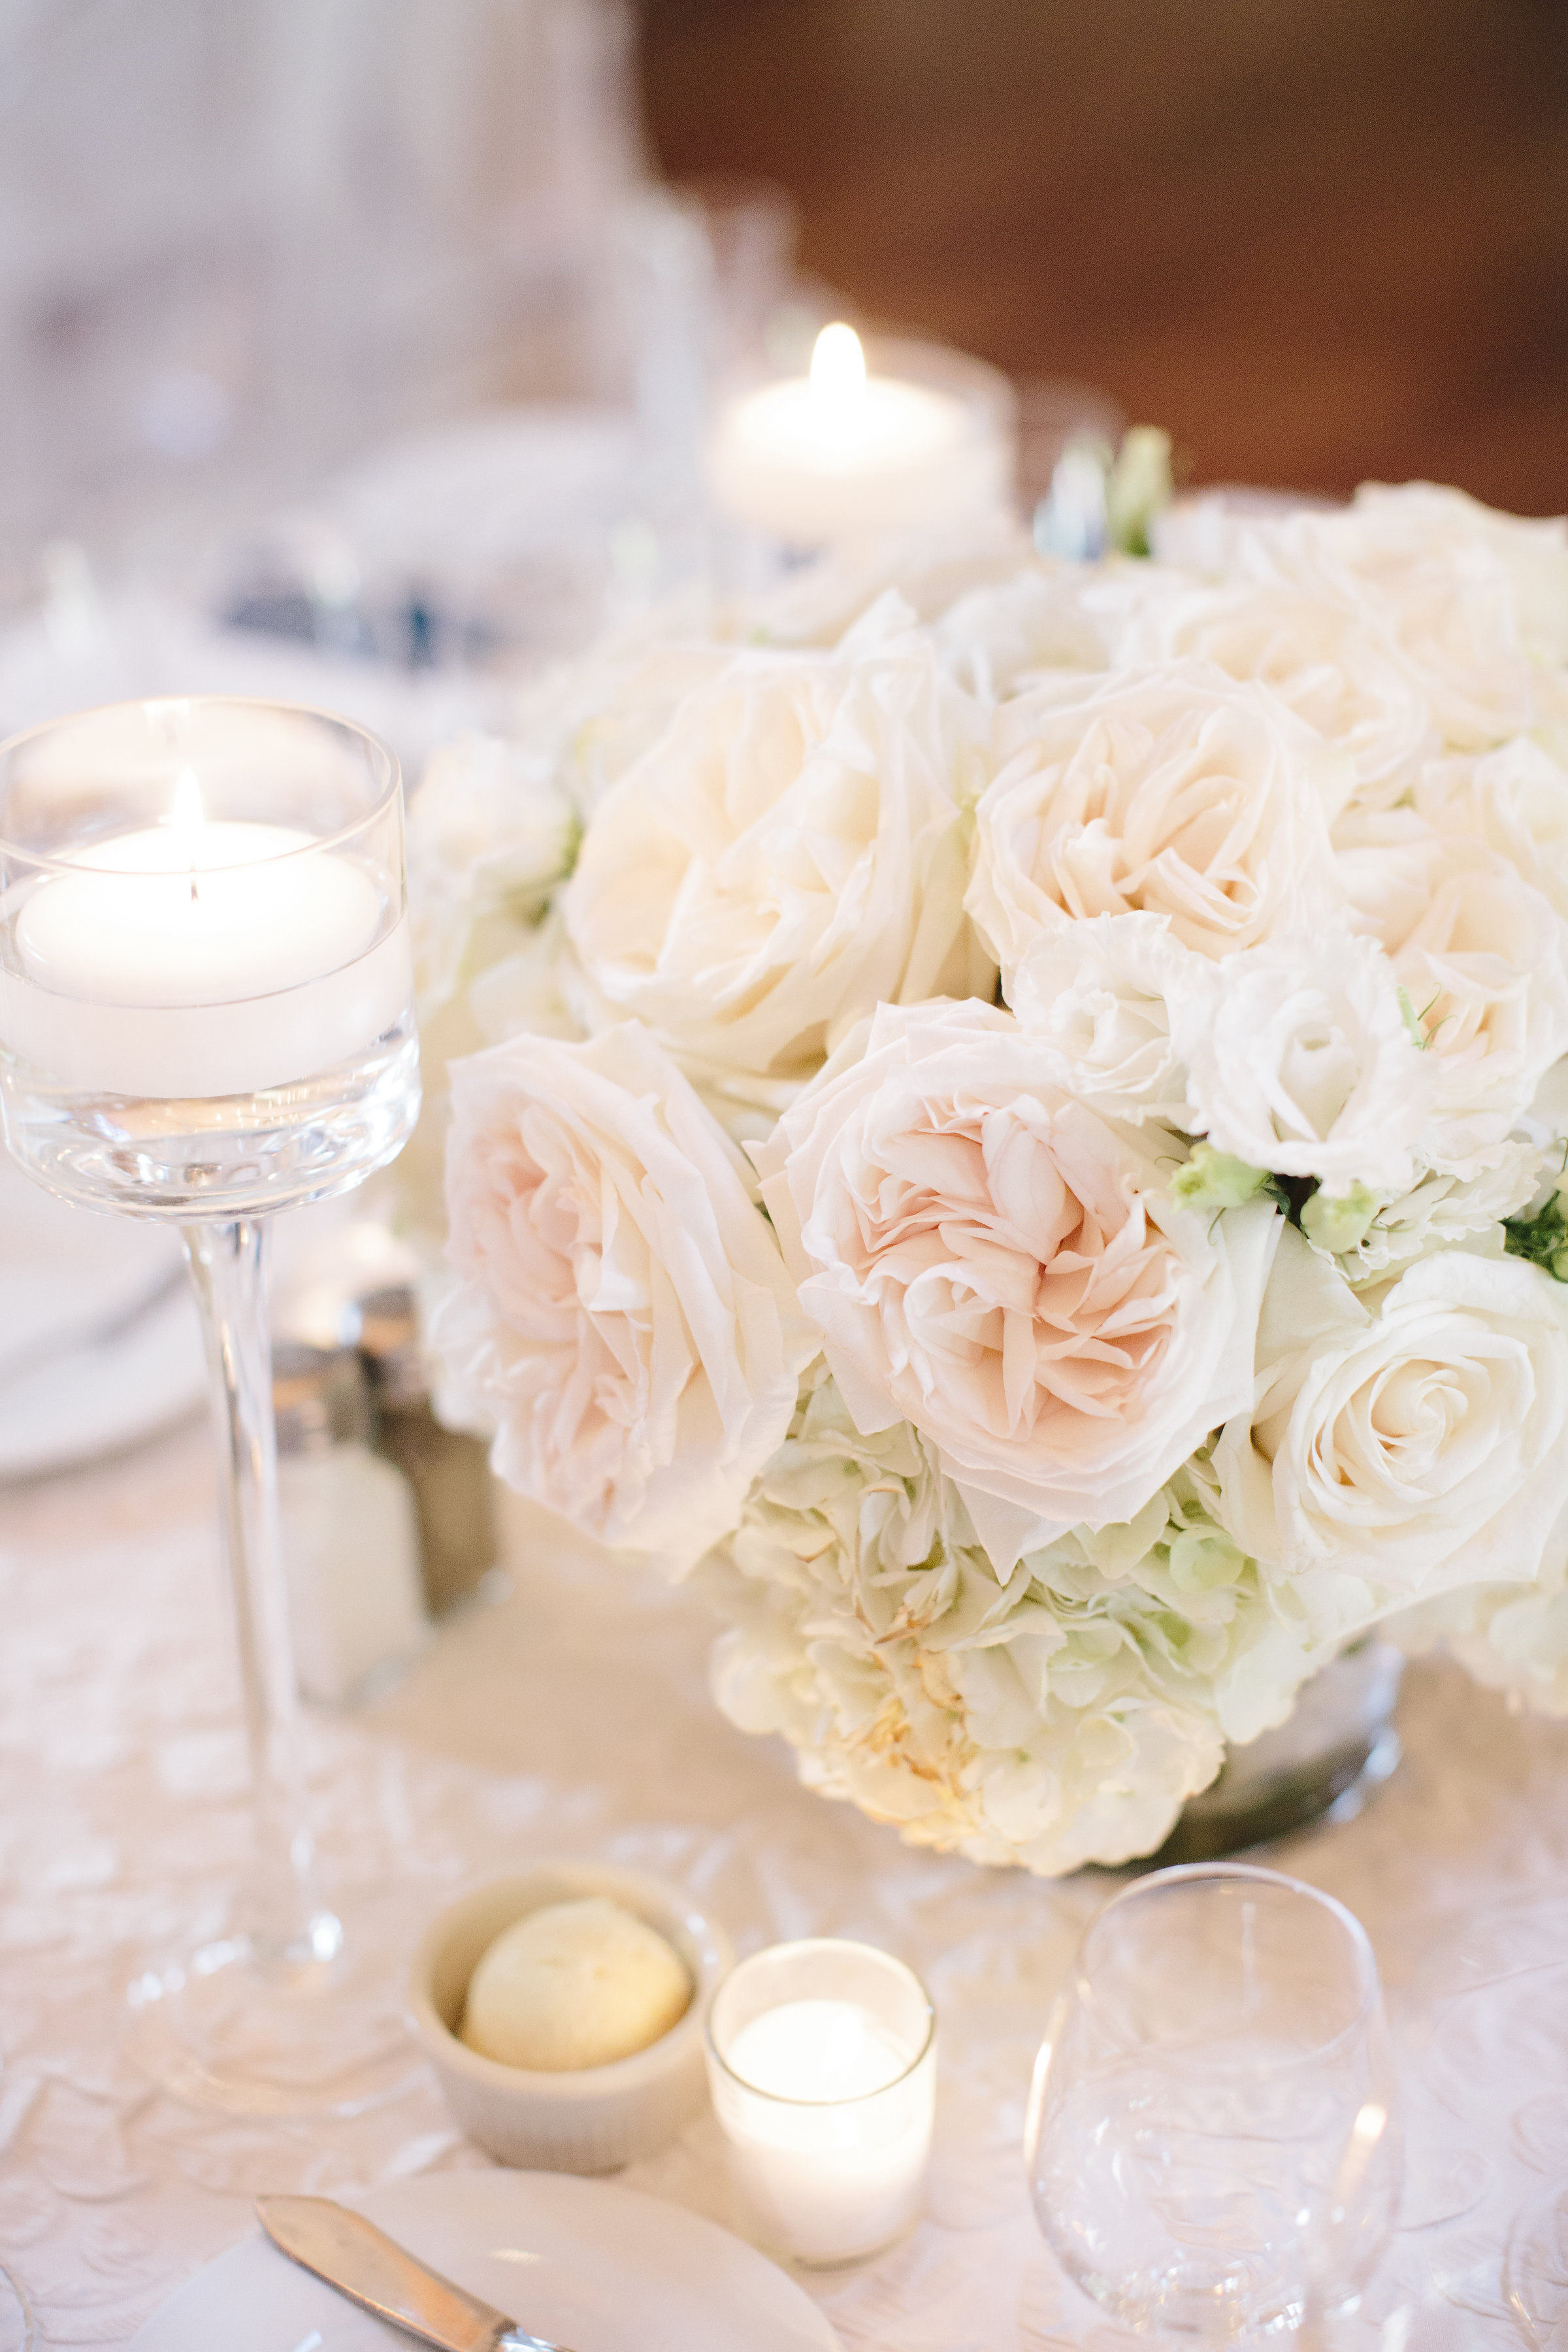 White wedding centerpieces by Lily Greenthumbs florist North Carolina